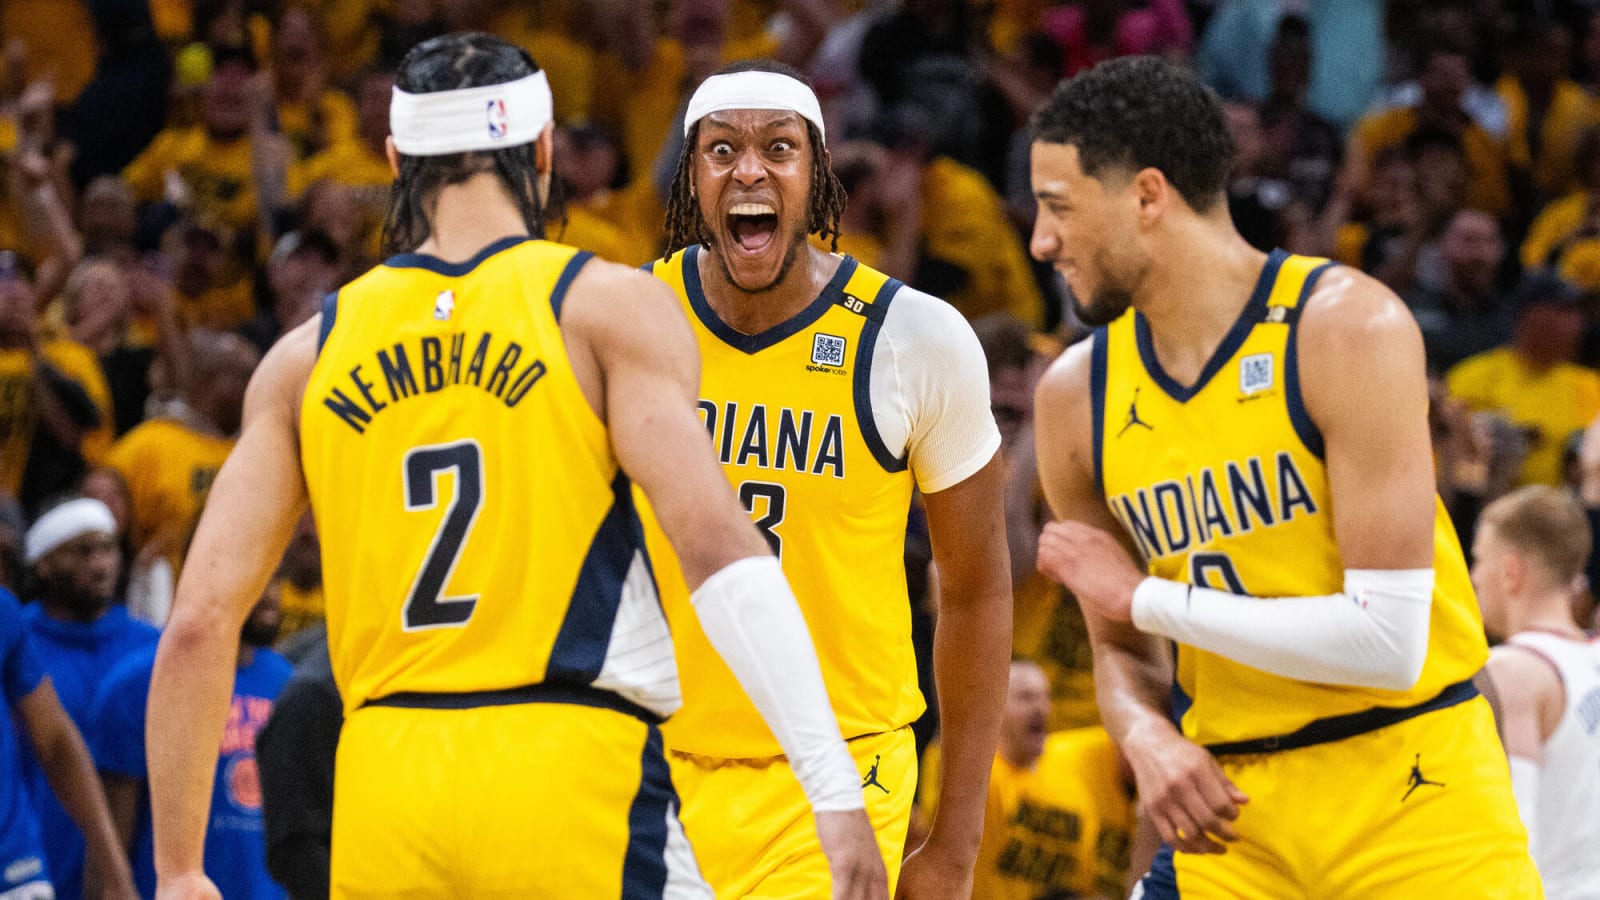 Pacers take Game 3 over Knicks to cut series lead to 2-1